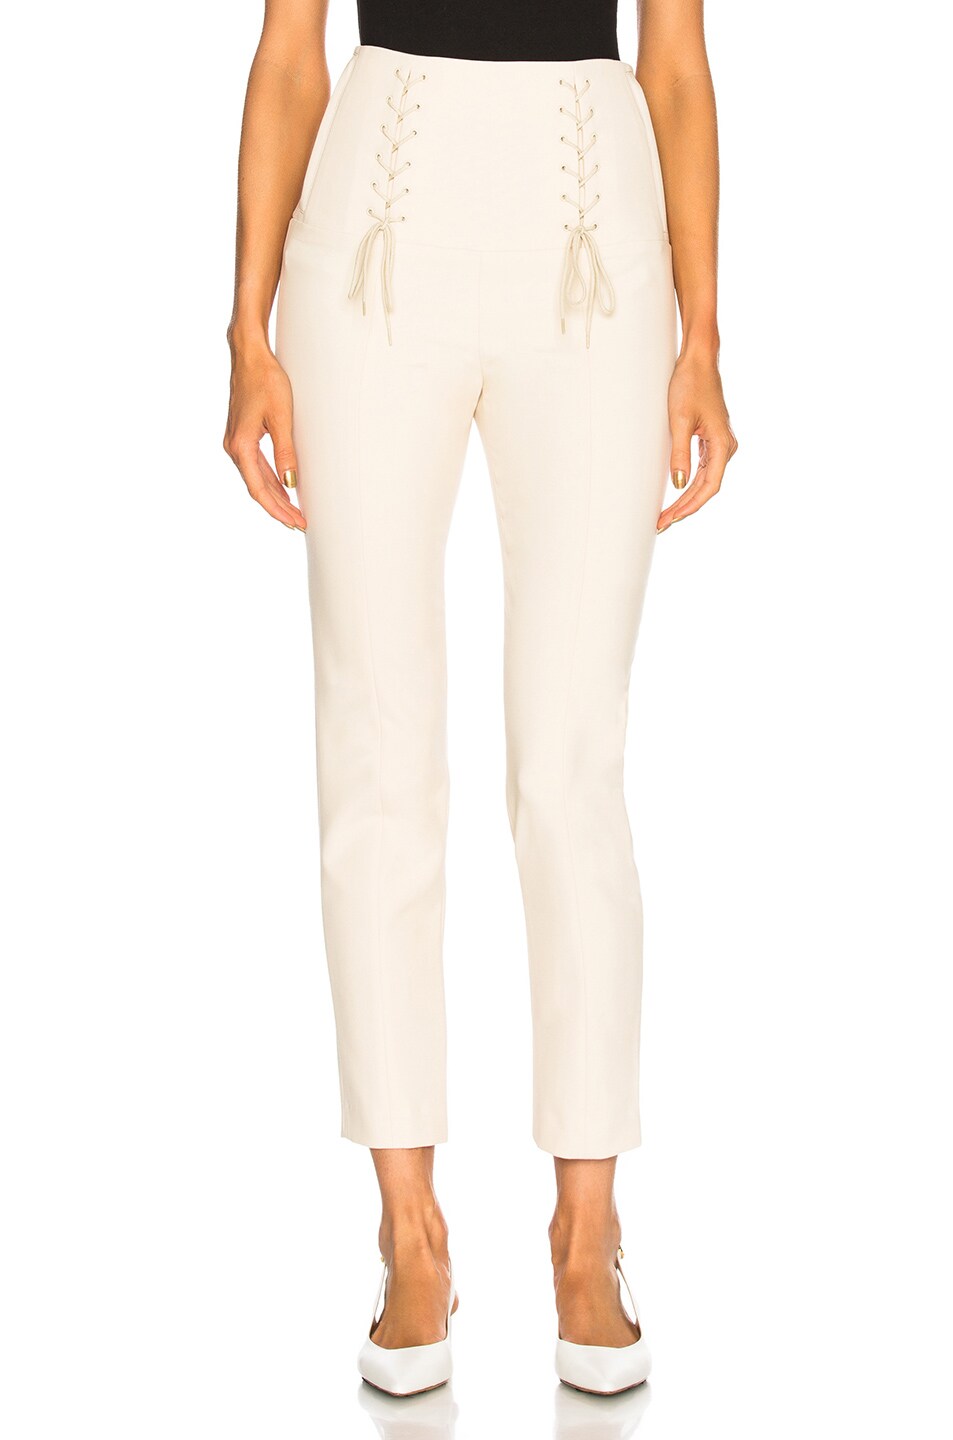 Image 1 of Tibi Anson Tie Pant in Oatmeal